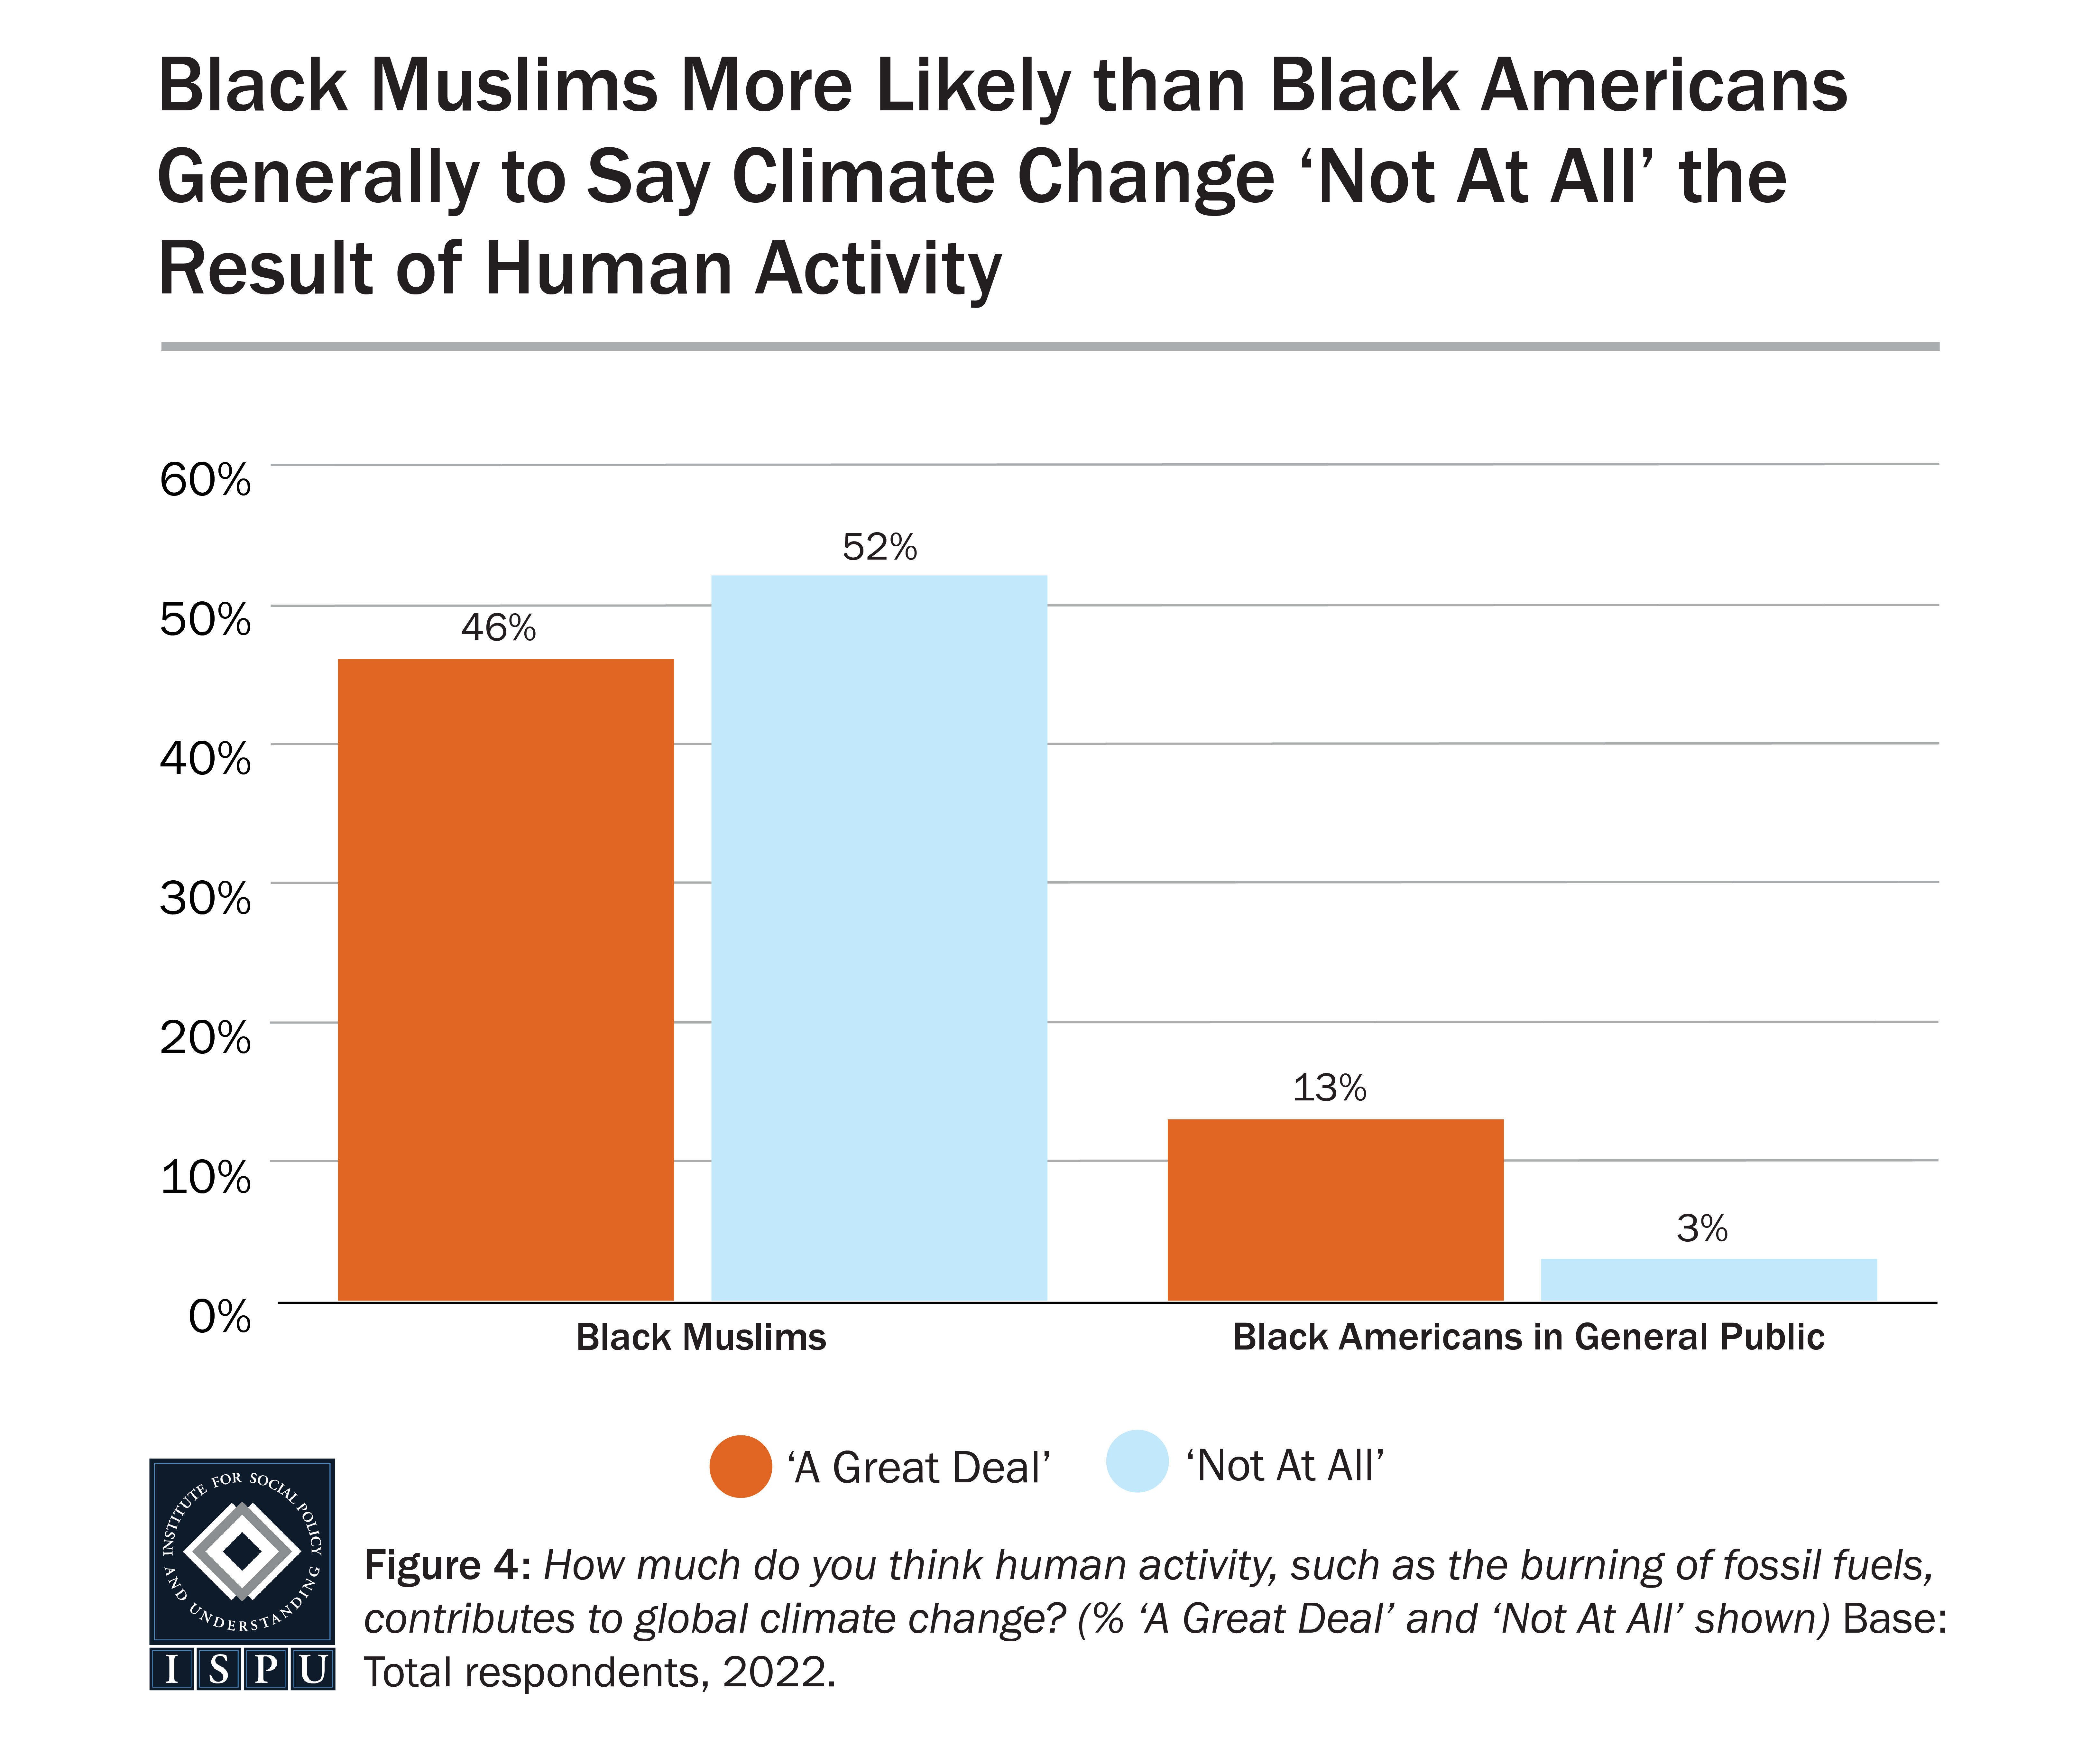 A bar graph showing the proportion of Black Muslims and Black Americans in the general public who attribute climate change “a great deal” and "not at all" to human activity.